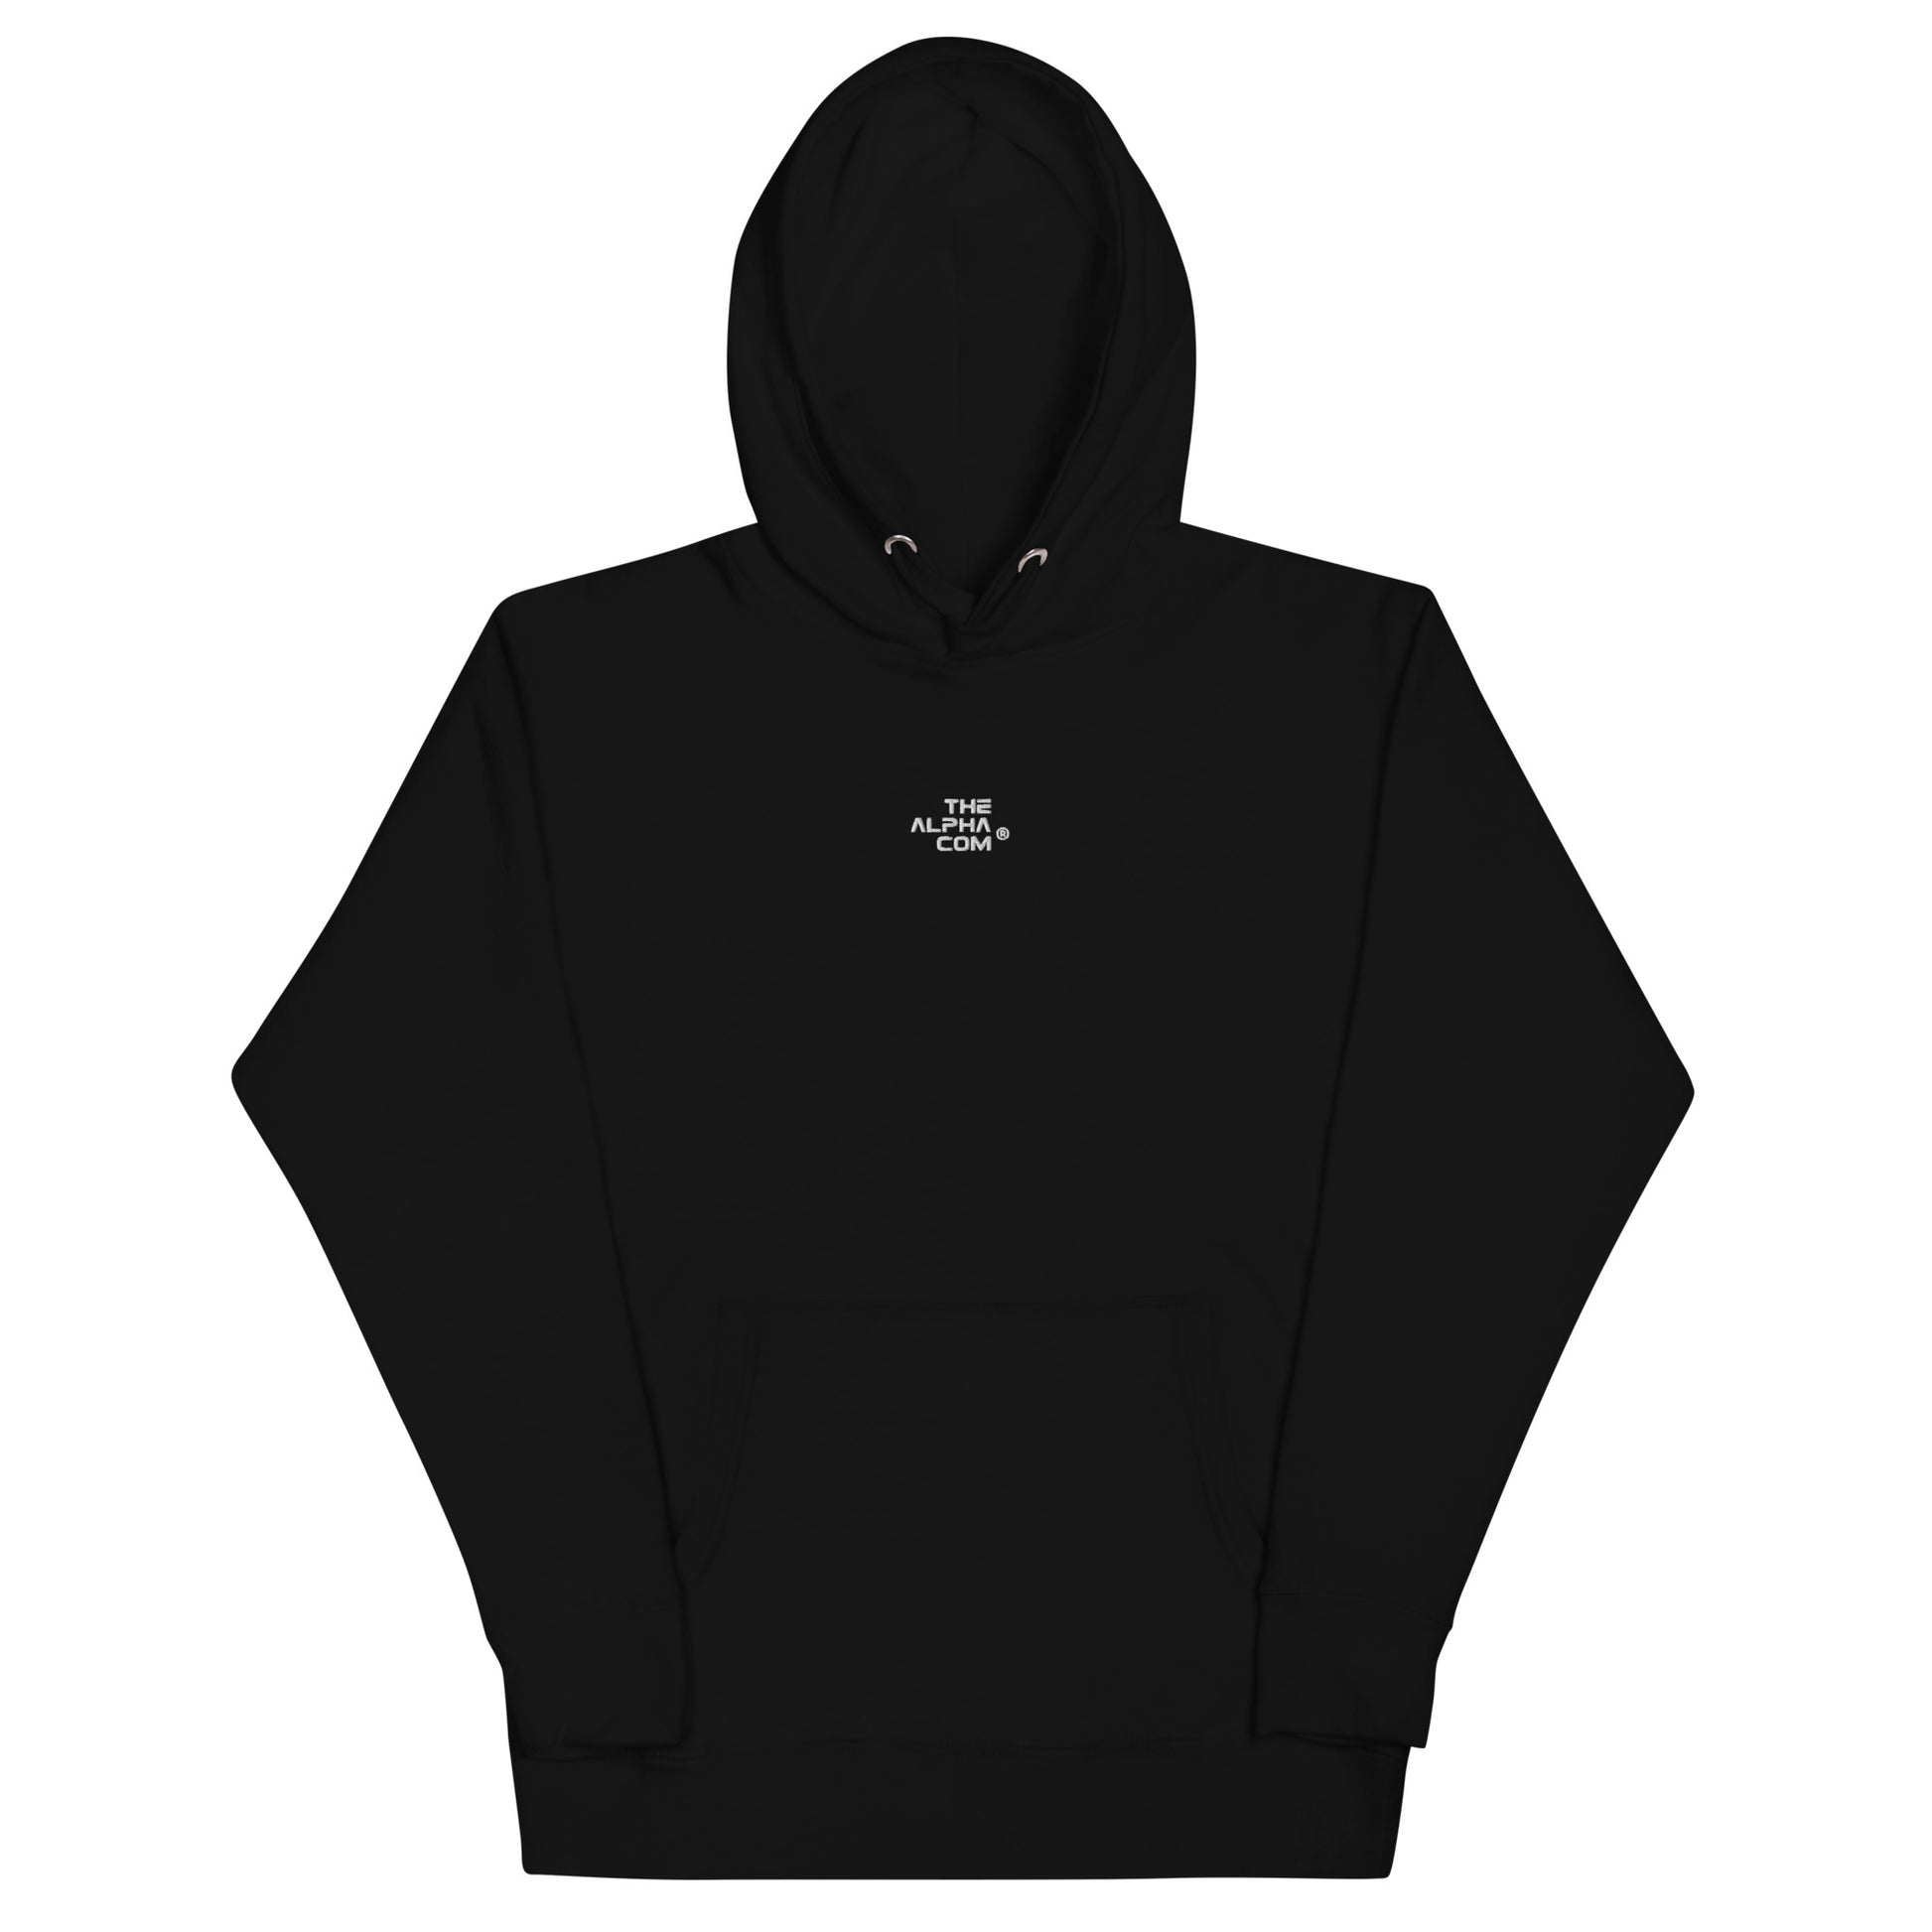 COM THE embroidered ® GRW ALPHA Unisex Hoodie